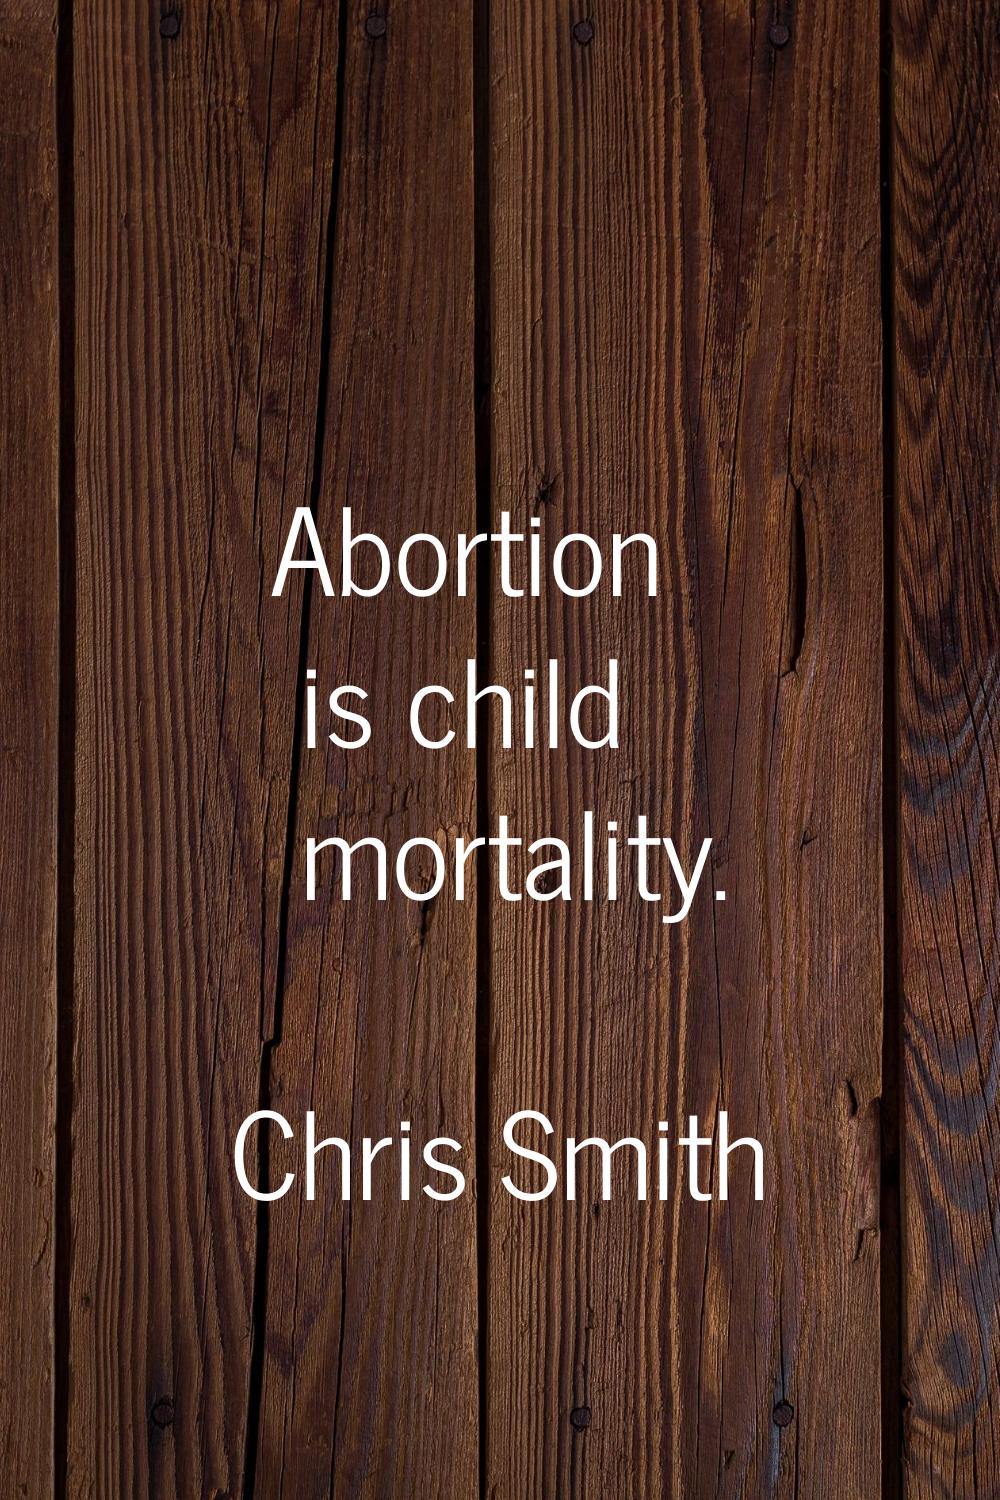 Abortion is child mortality.